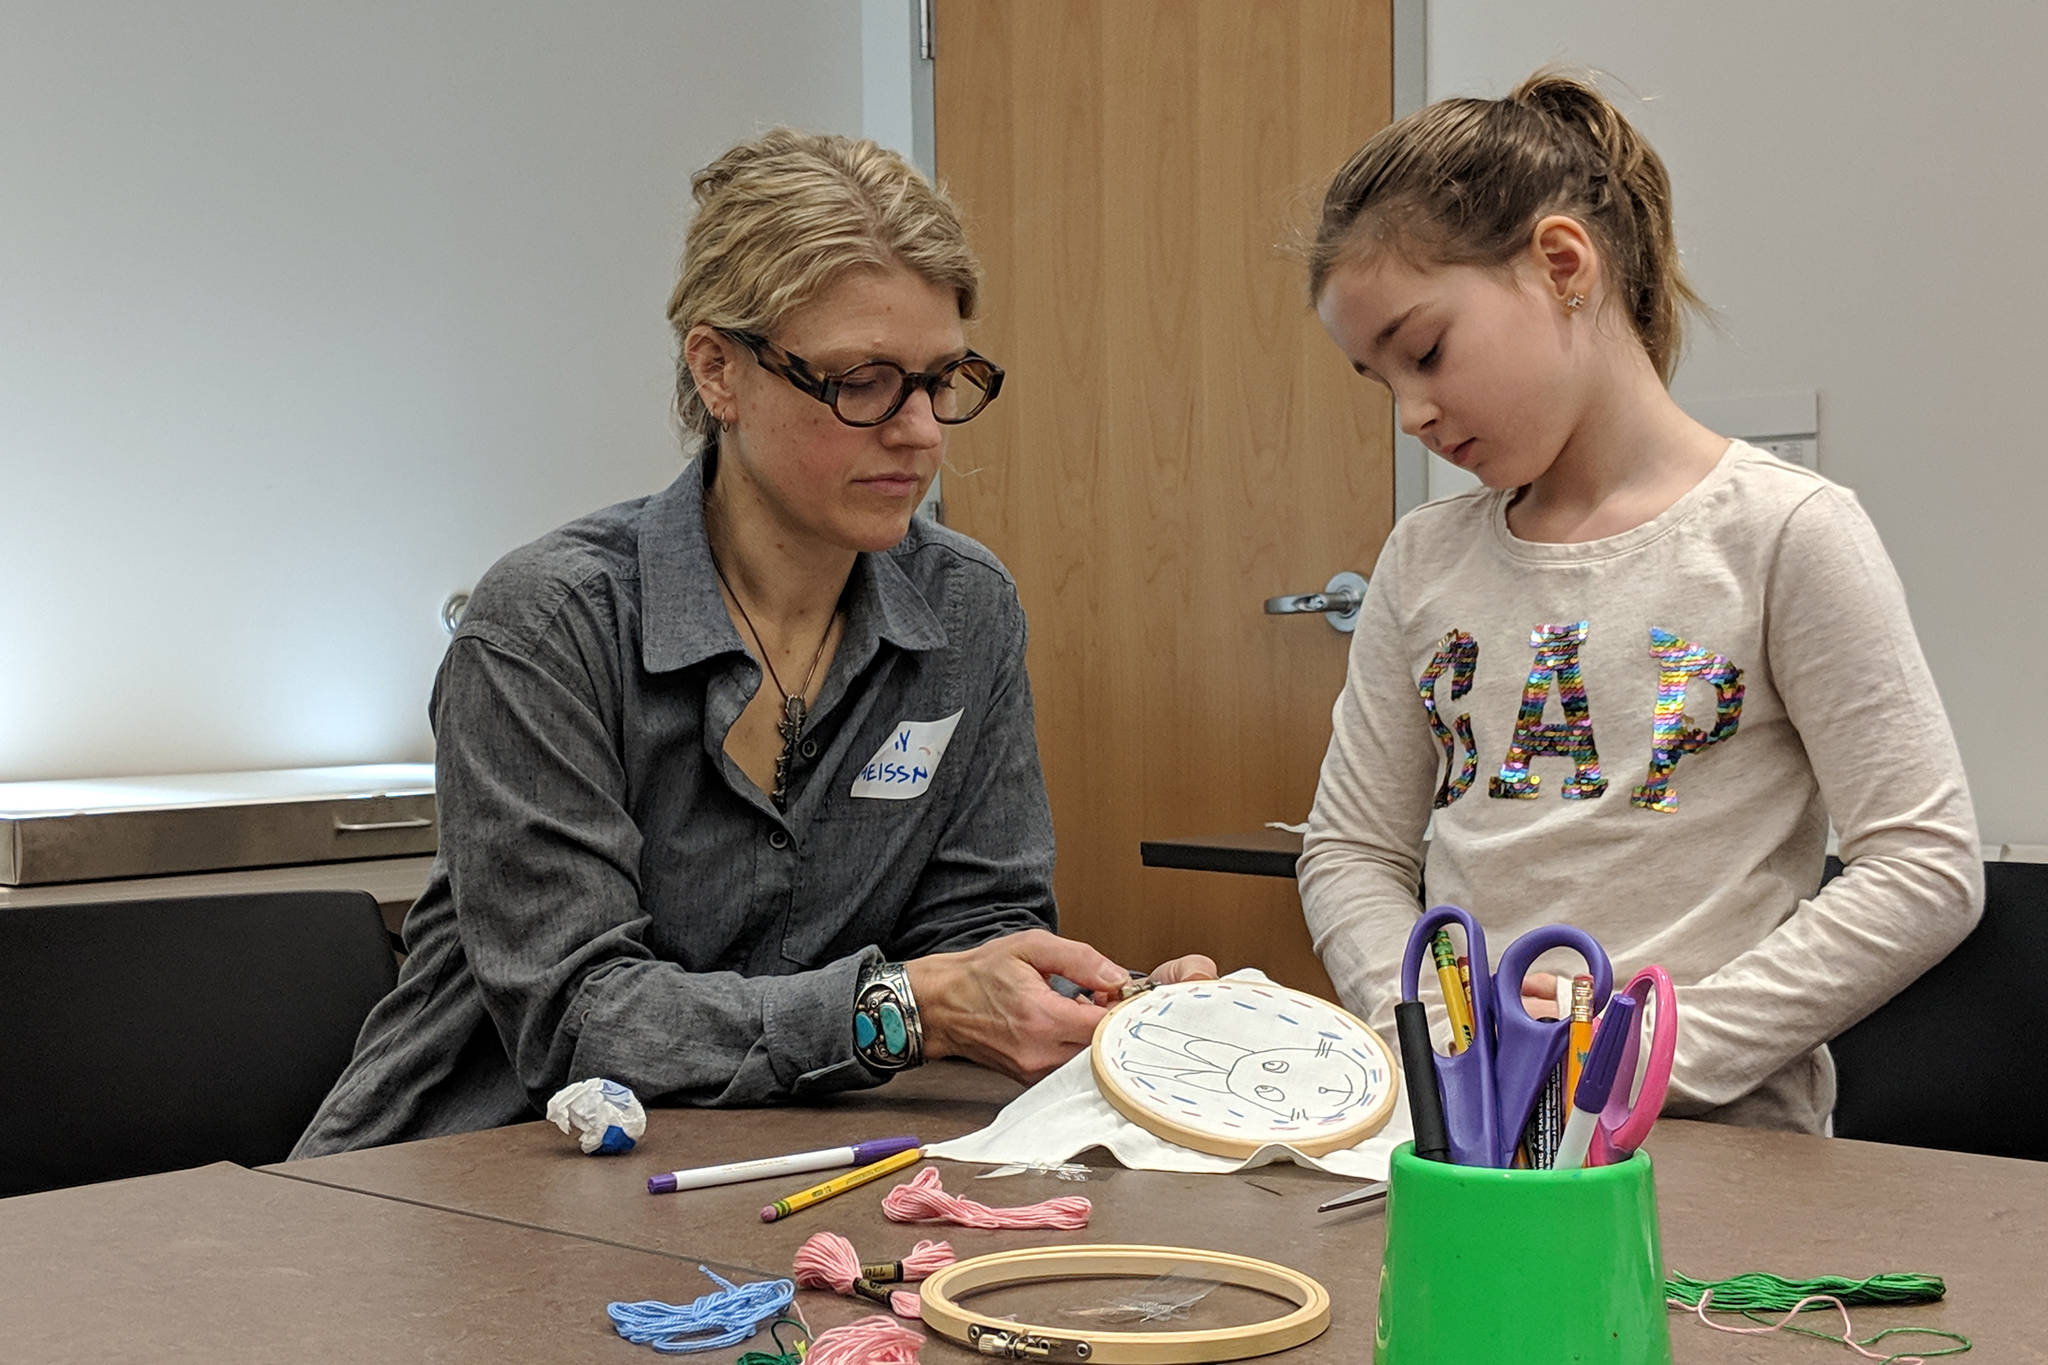 Artist Amy Meissner works with Ellinore Higgins, 7, during an embroidery activity for kids Saturday, Dec.8, 2018 at the Alaska State Library, Archives and Museum. (Ben Hohenstatt | Capital City Weekly)